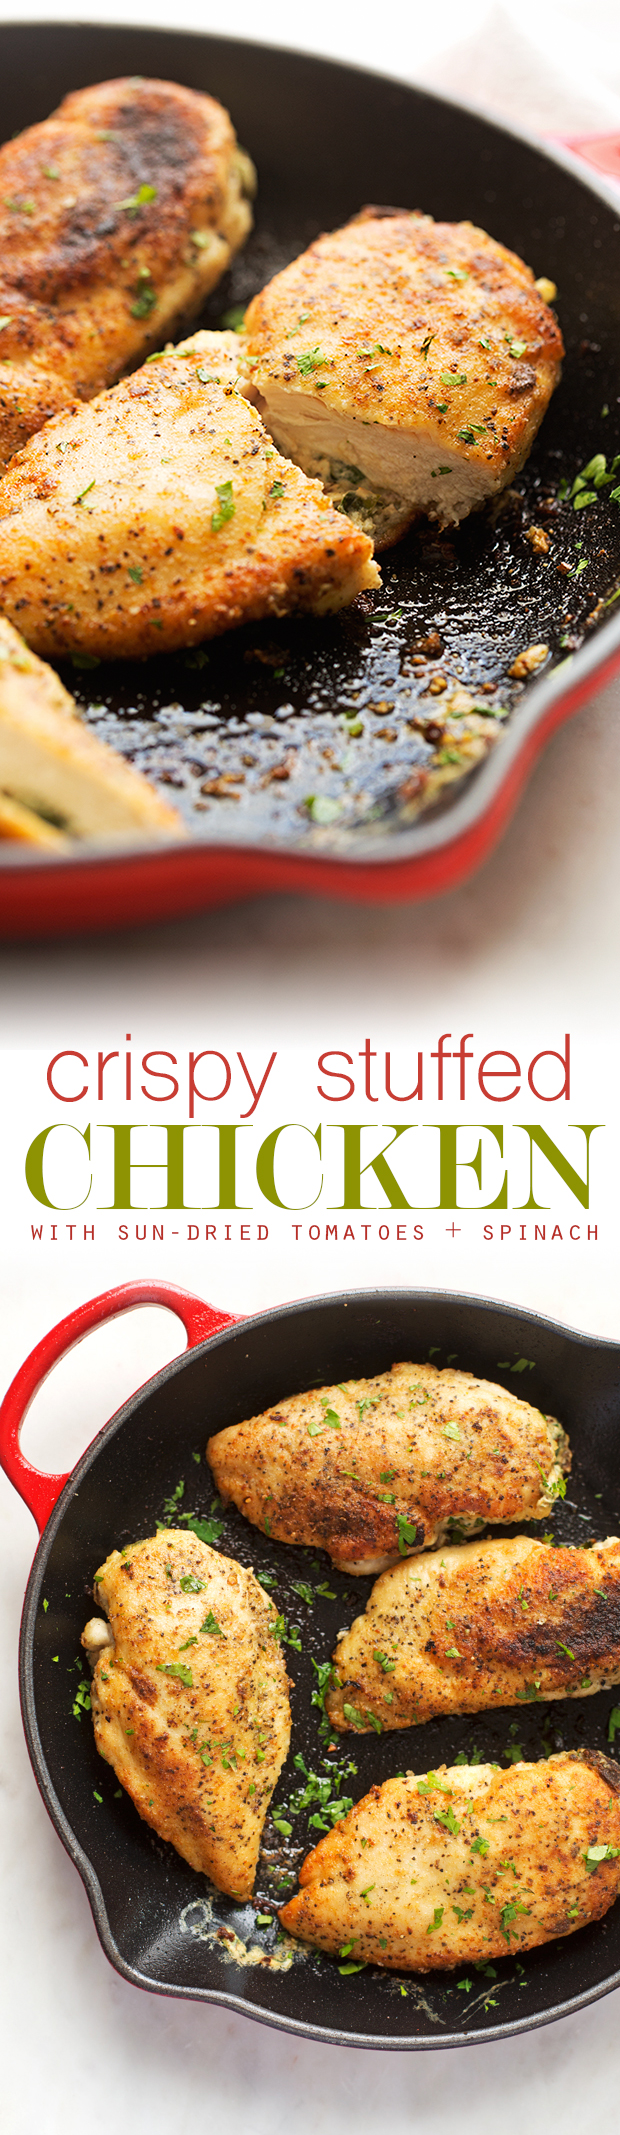 Sun-Dried Tomato and Spinach Stuffed Chicken Breasts - a simple yet elegant recipe for stuffed chicken breasts. Crispy on the outside and cheesy on the inside! #chicken #stuffedchicken #chickenrecipes | Littlespicejar.com